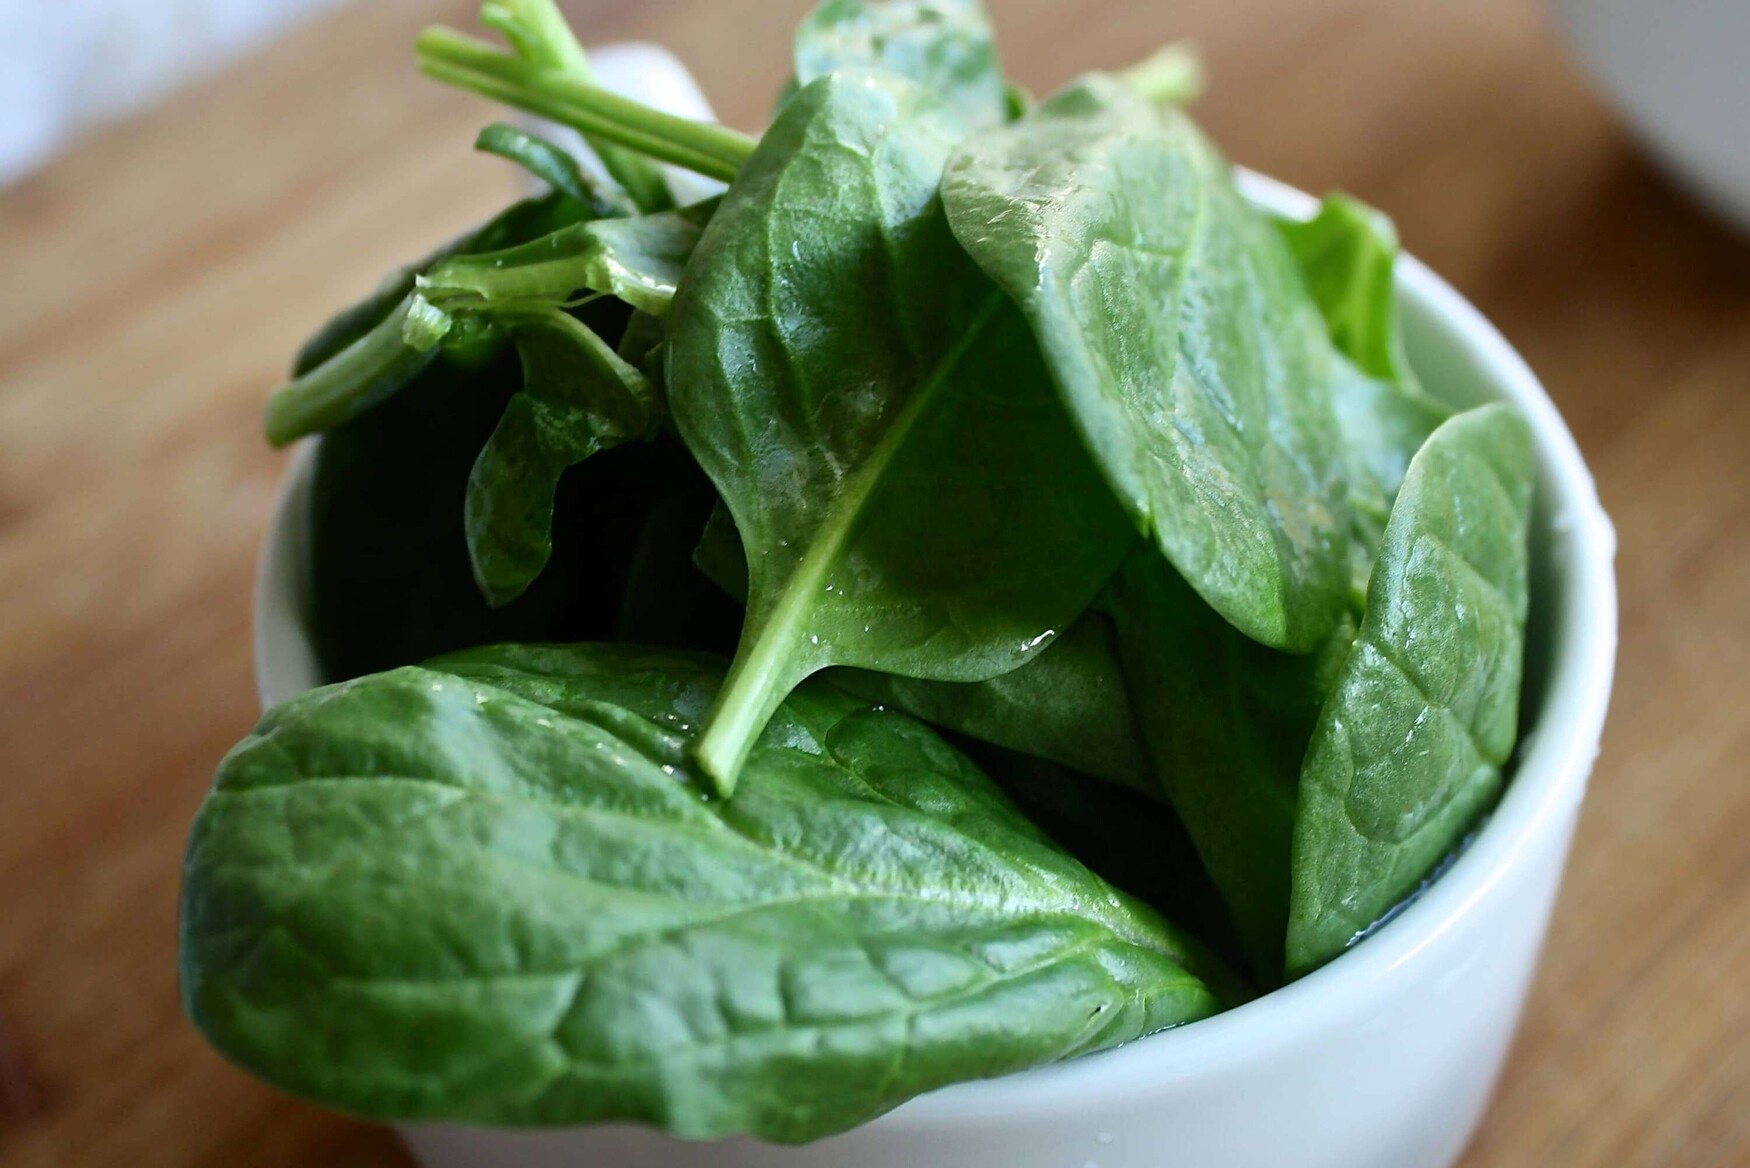 a bawl of spinach leaves